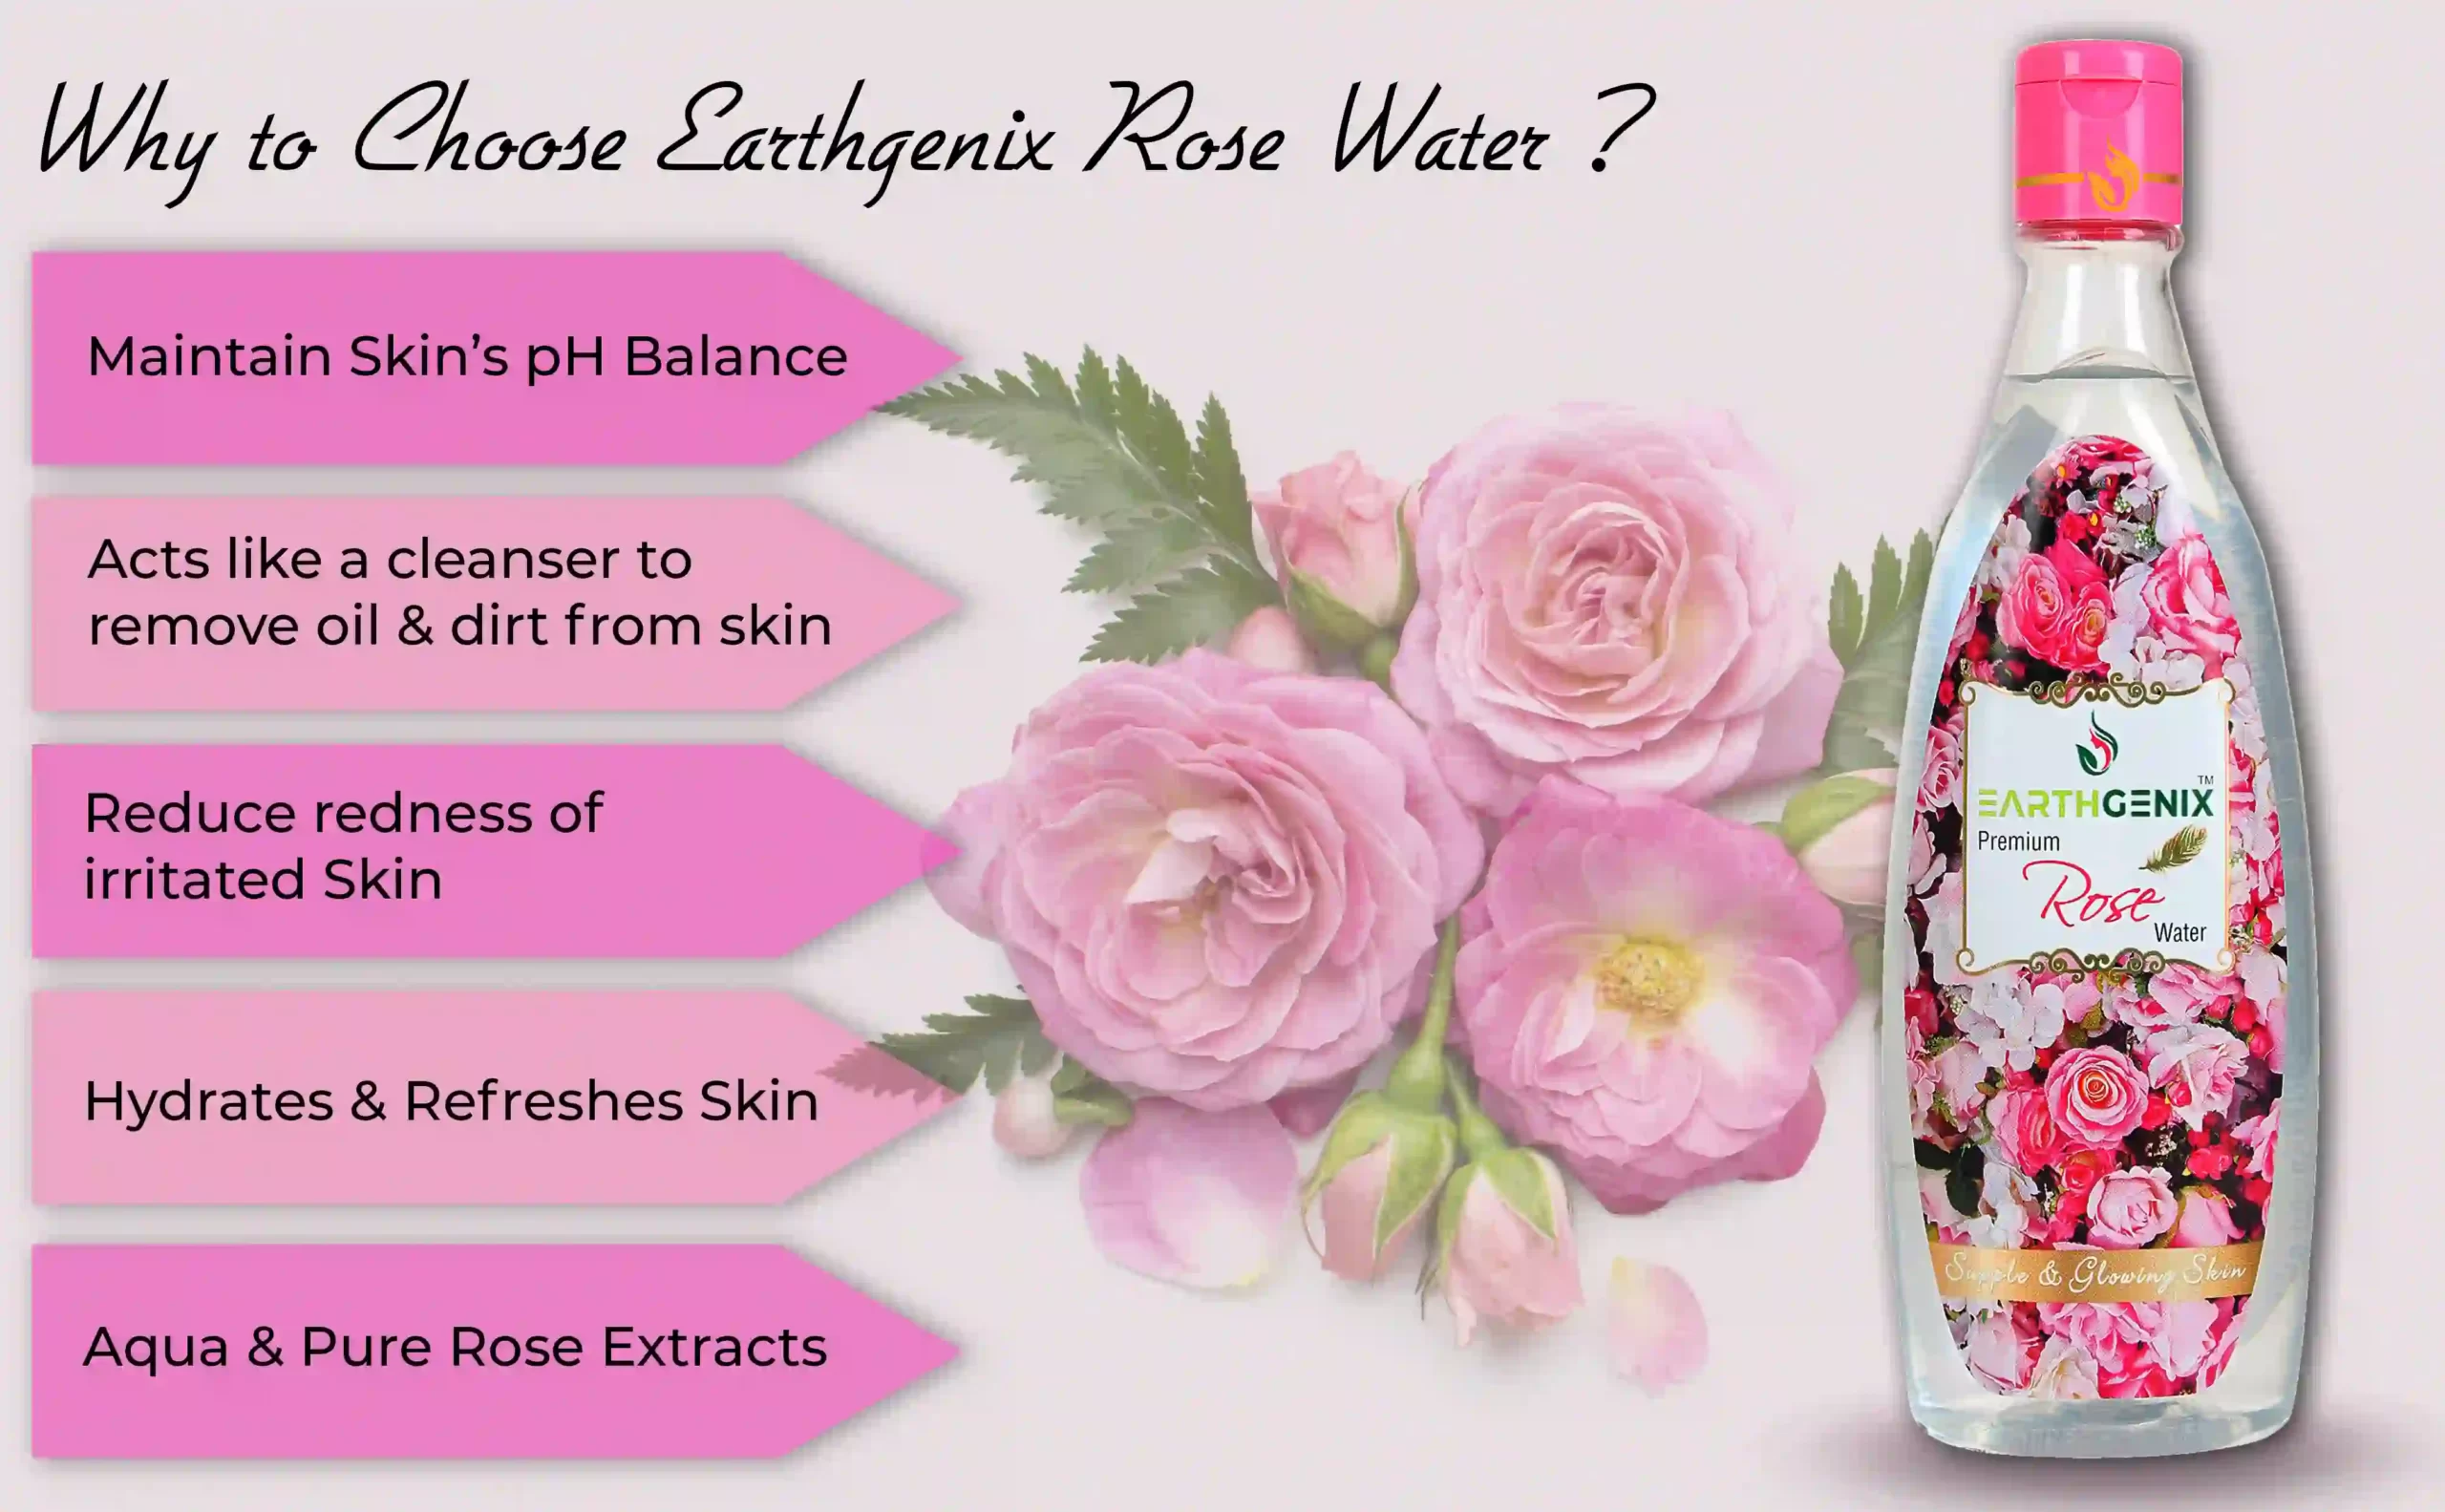 Earthgenix  Pure Glycerine + Natural Rose Extracts 100ml (Pack of 2), for  Soft, Supple & Radiant Skin